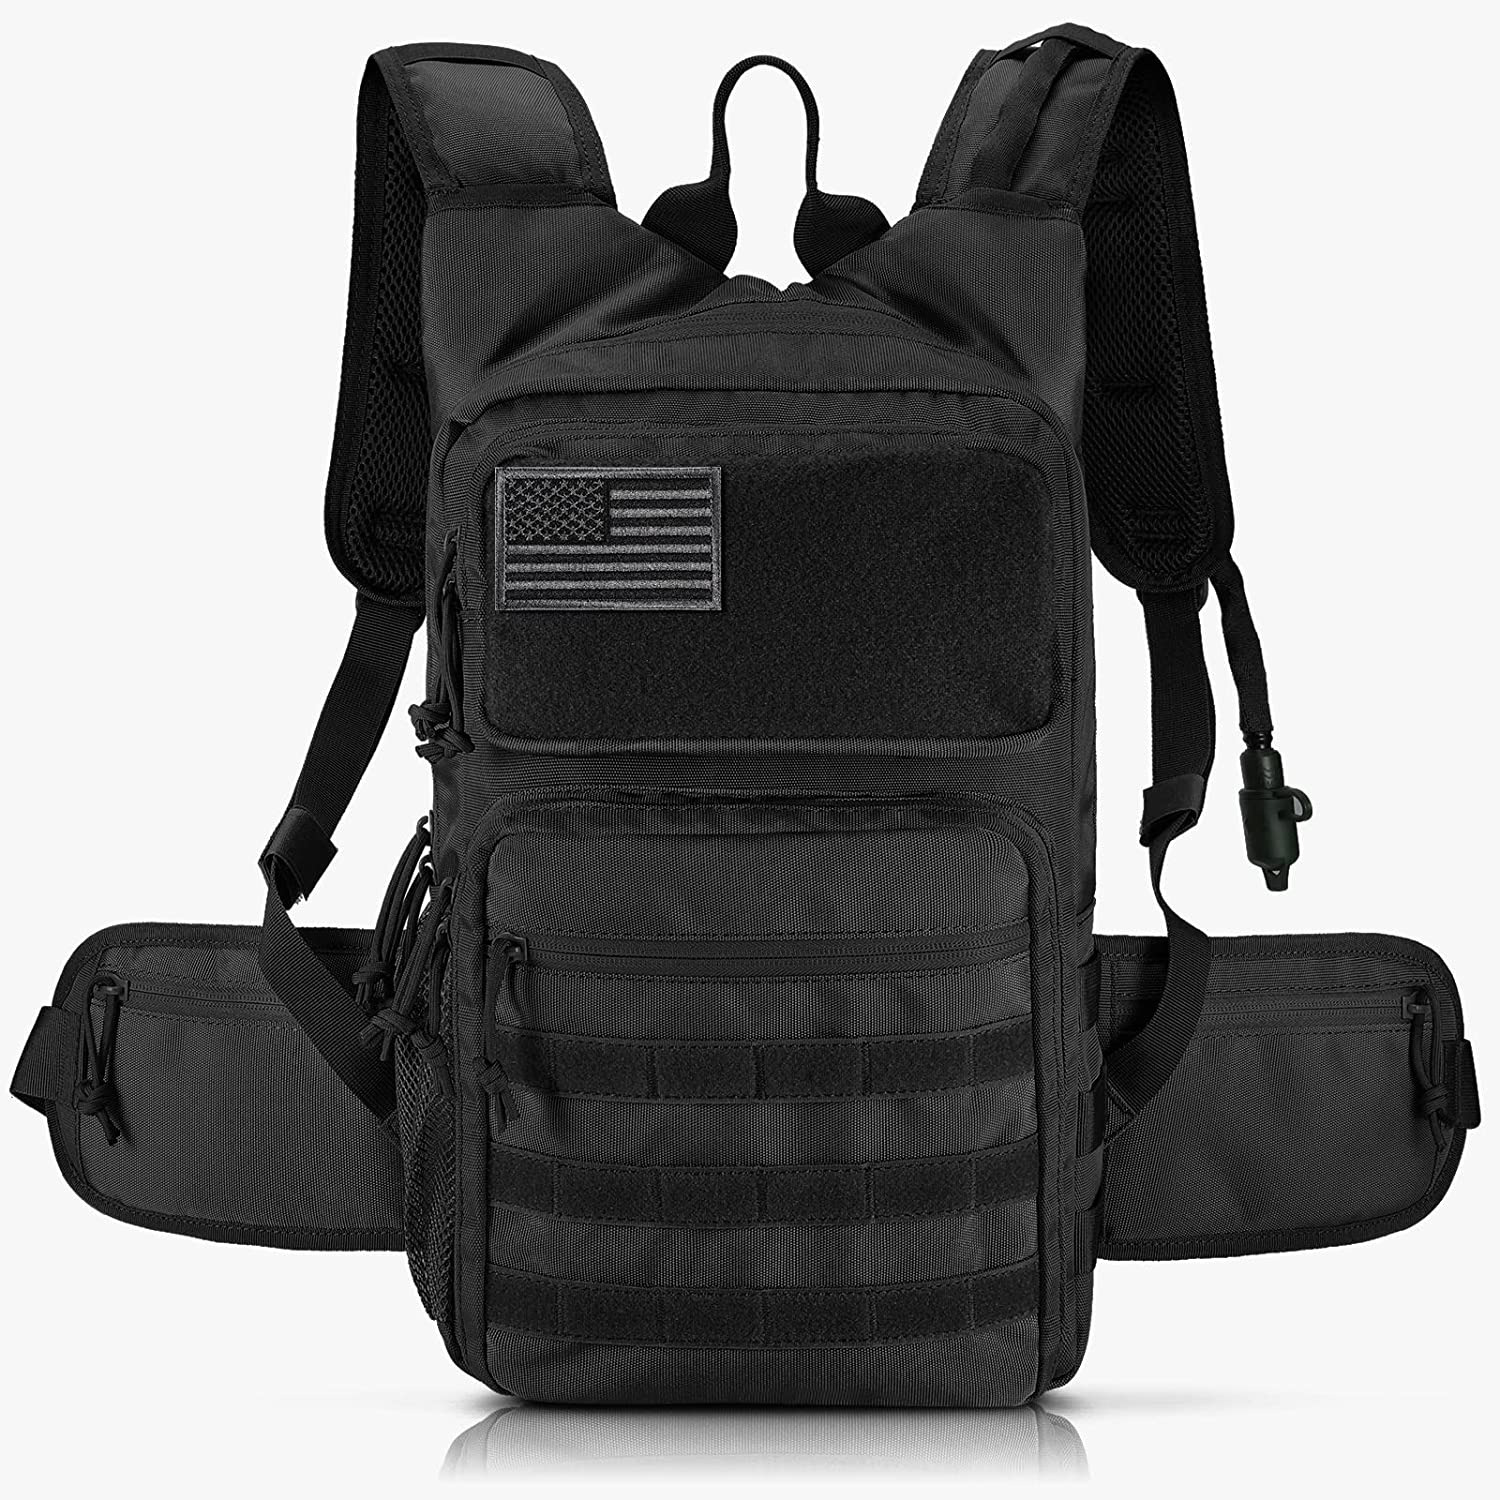 Outdoor Water Resistant Chest Bag, Tactical Molle Chest Bag, Hands Free  Utility Chest Pack For Walking, Running, Fishing, Cycling, Hiking etc